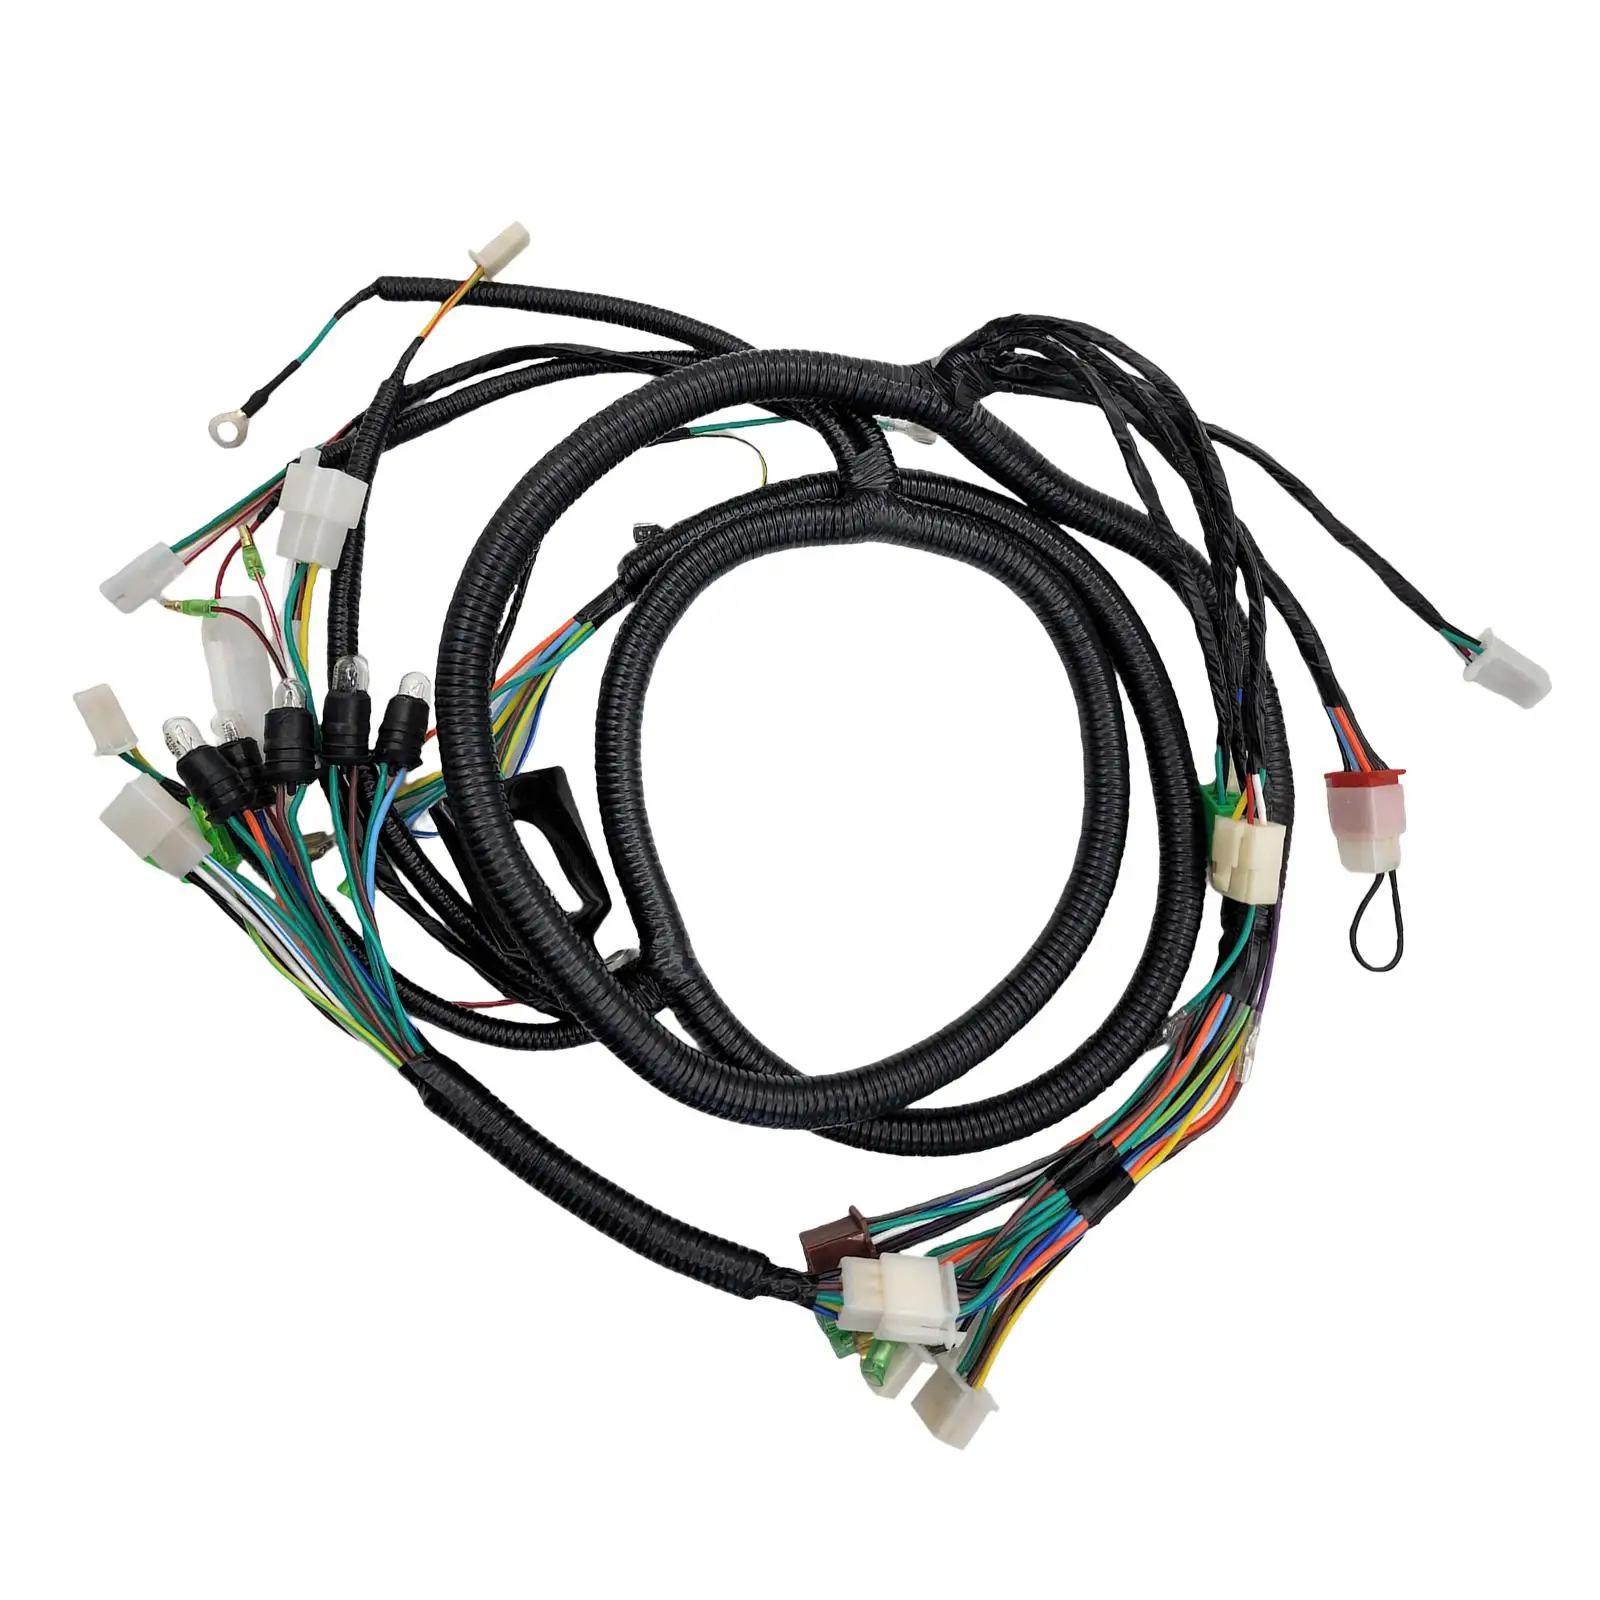 Replacement Harness Kits Replaces Wiring Harness for 50cc Scooters with 50cc Gy6 Engines Car Accessories Premium